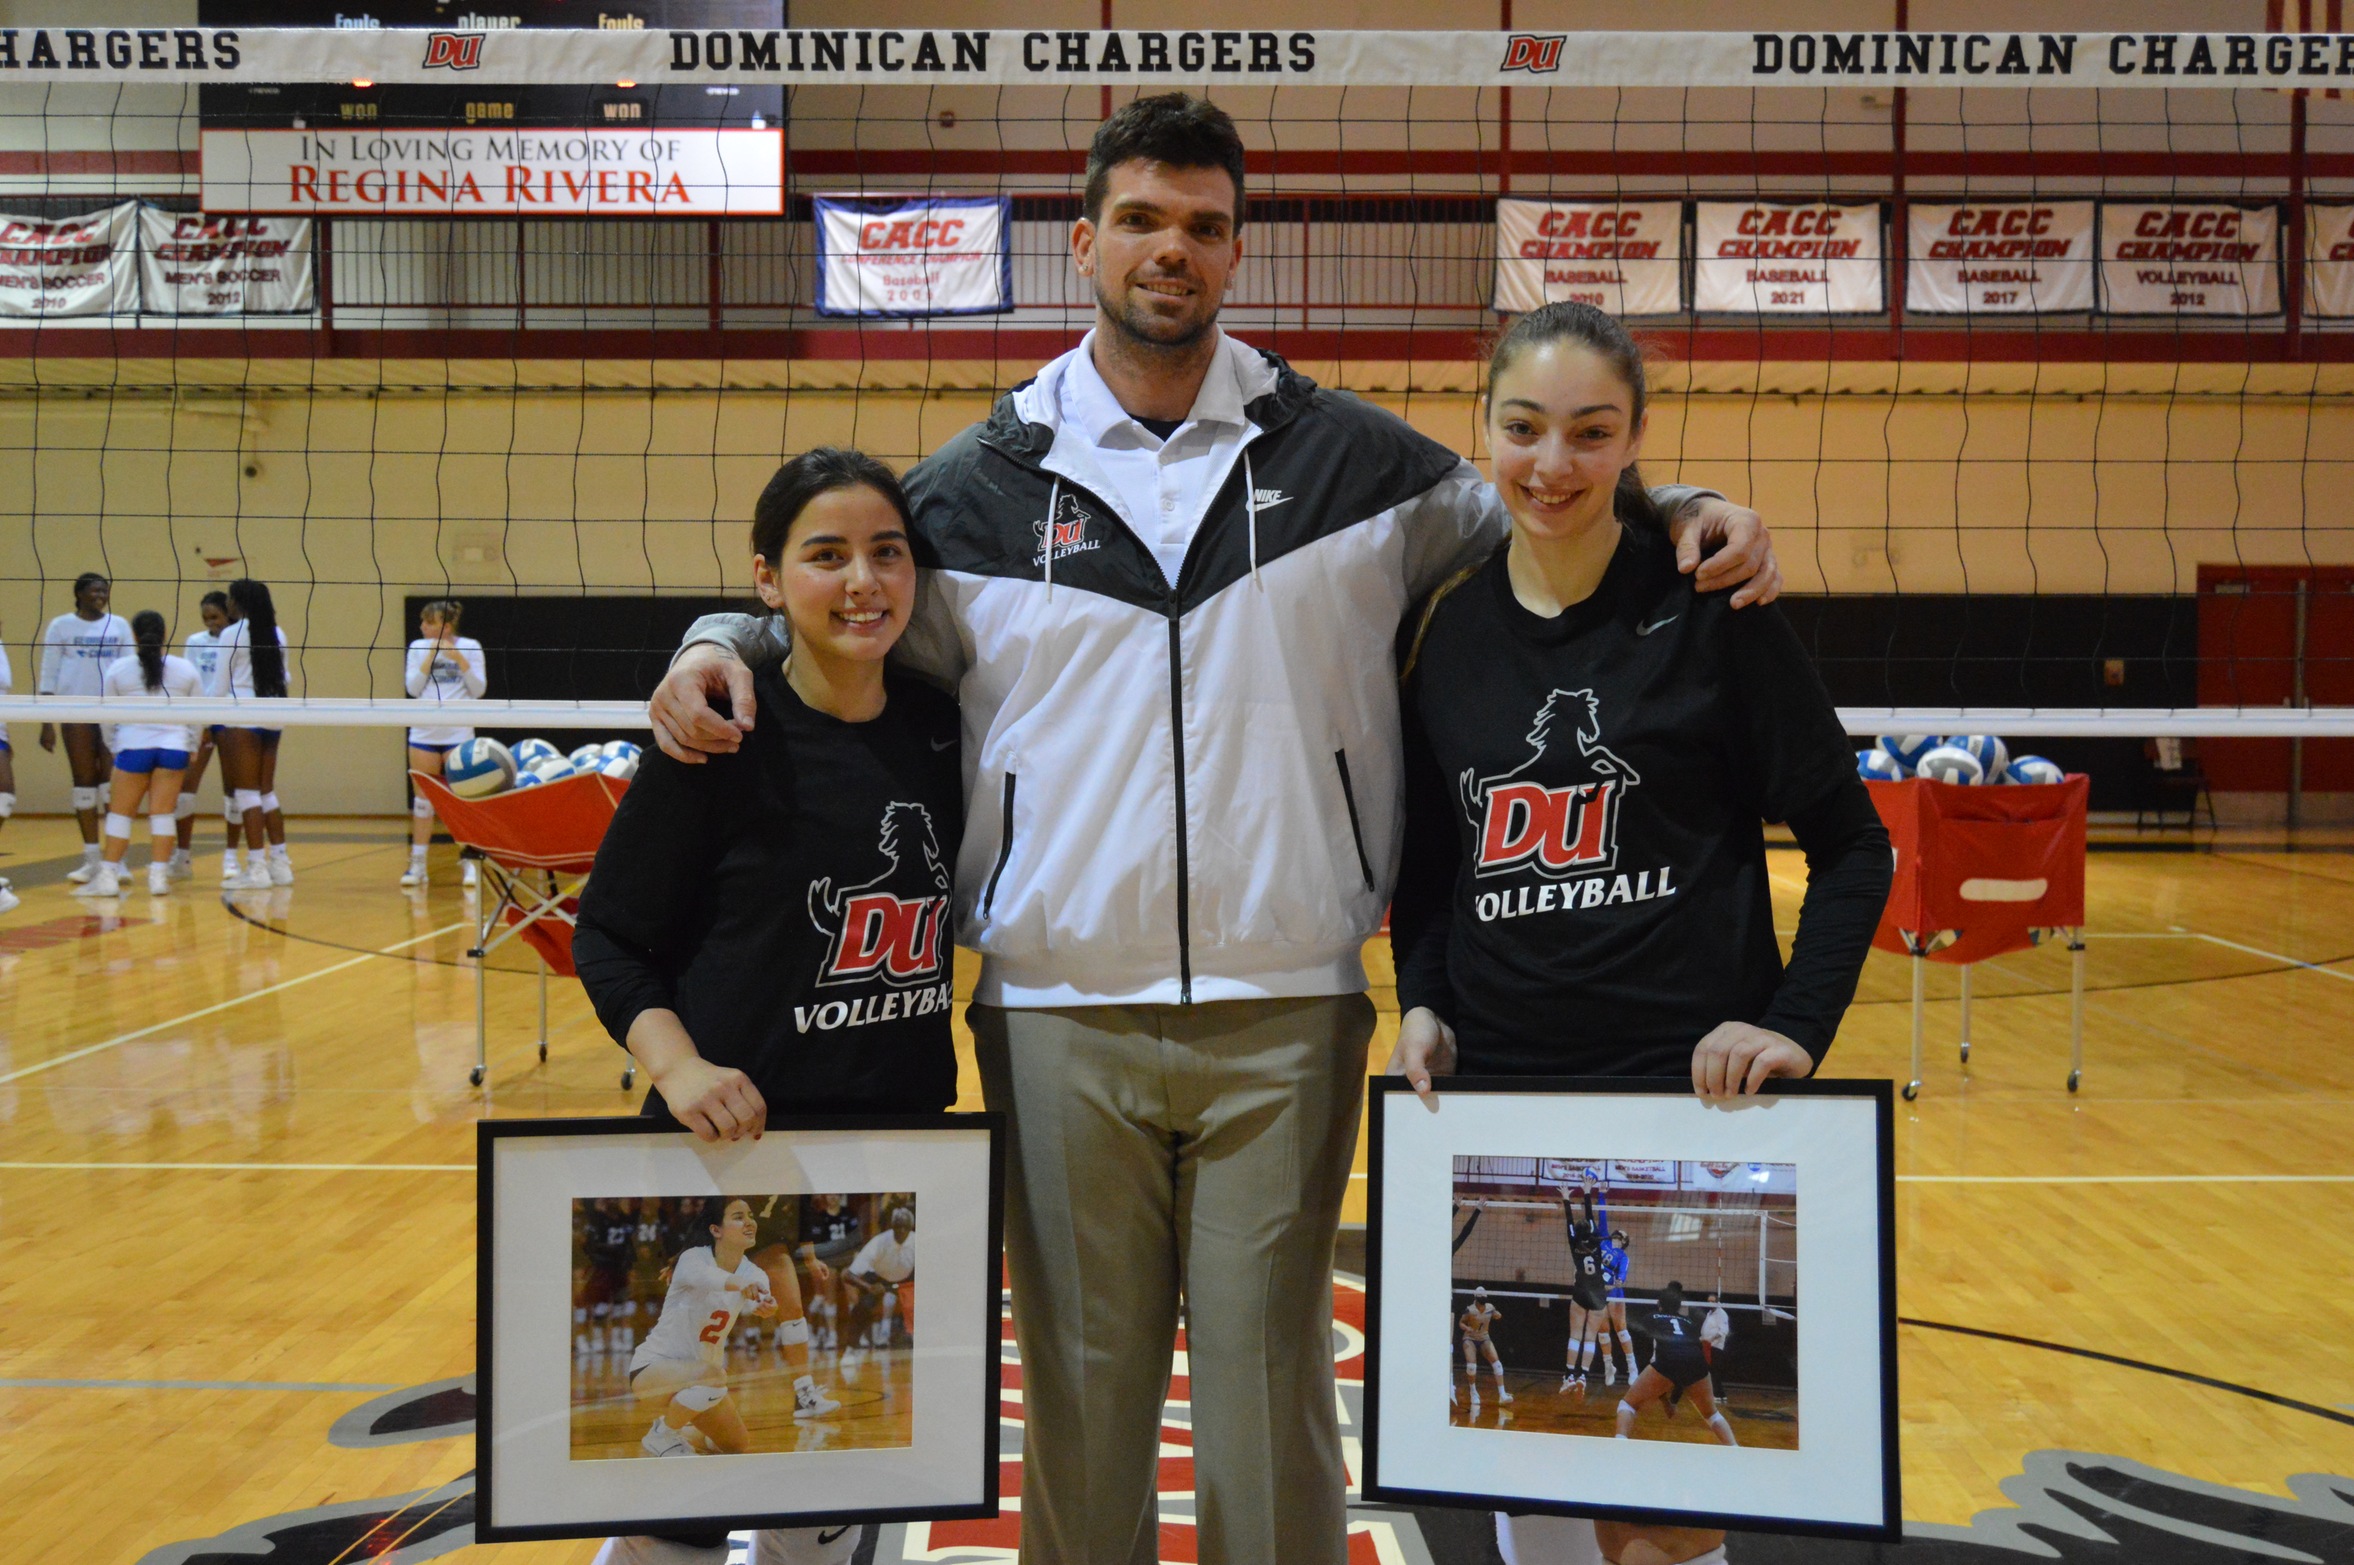 VOLLEYBALL WINS EXCITING MATCH ON SENIOR DAY